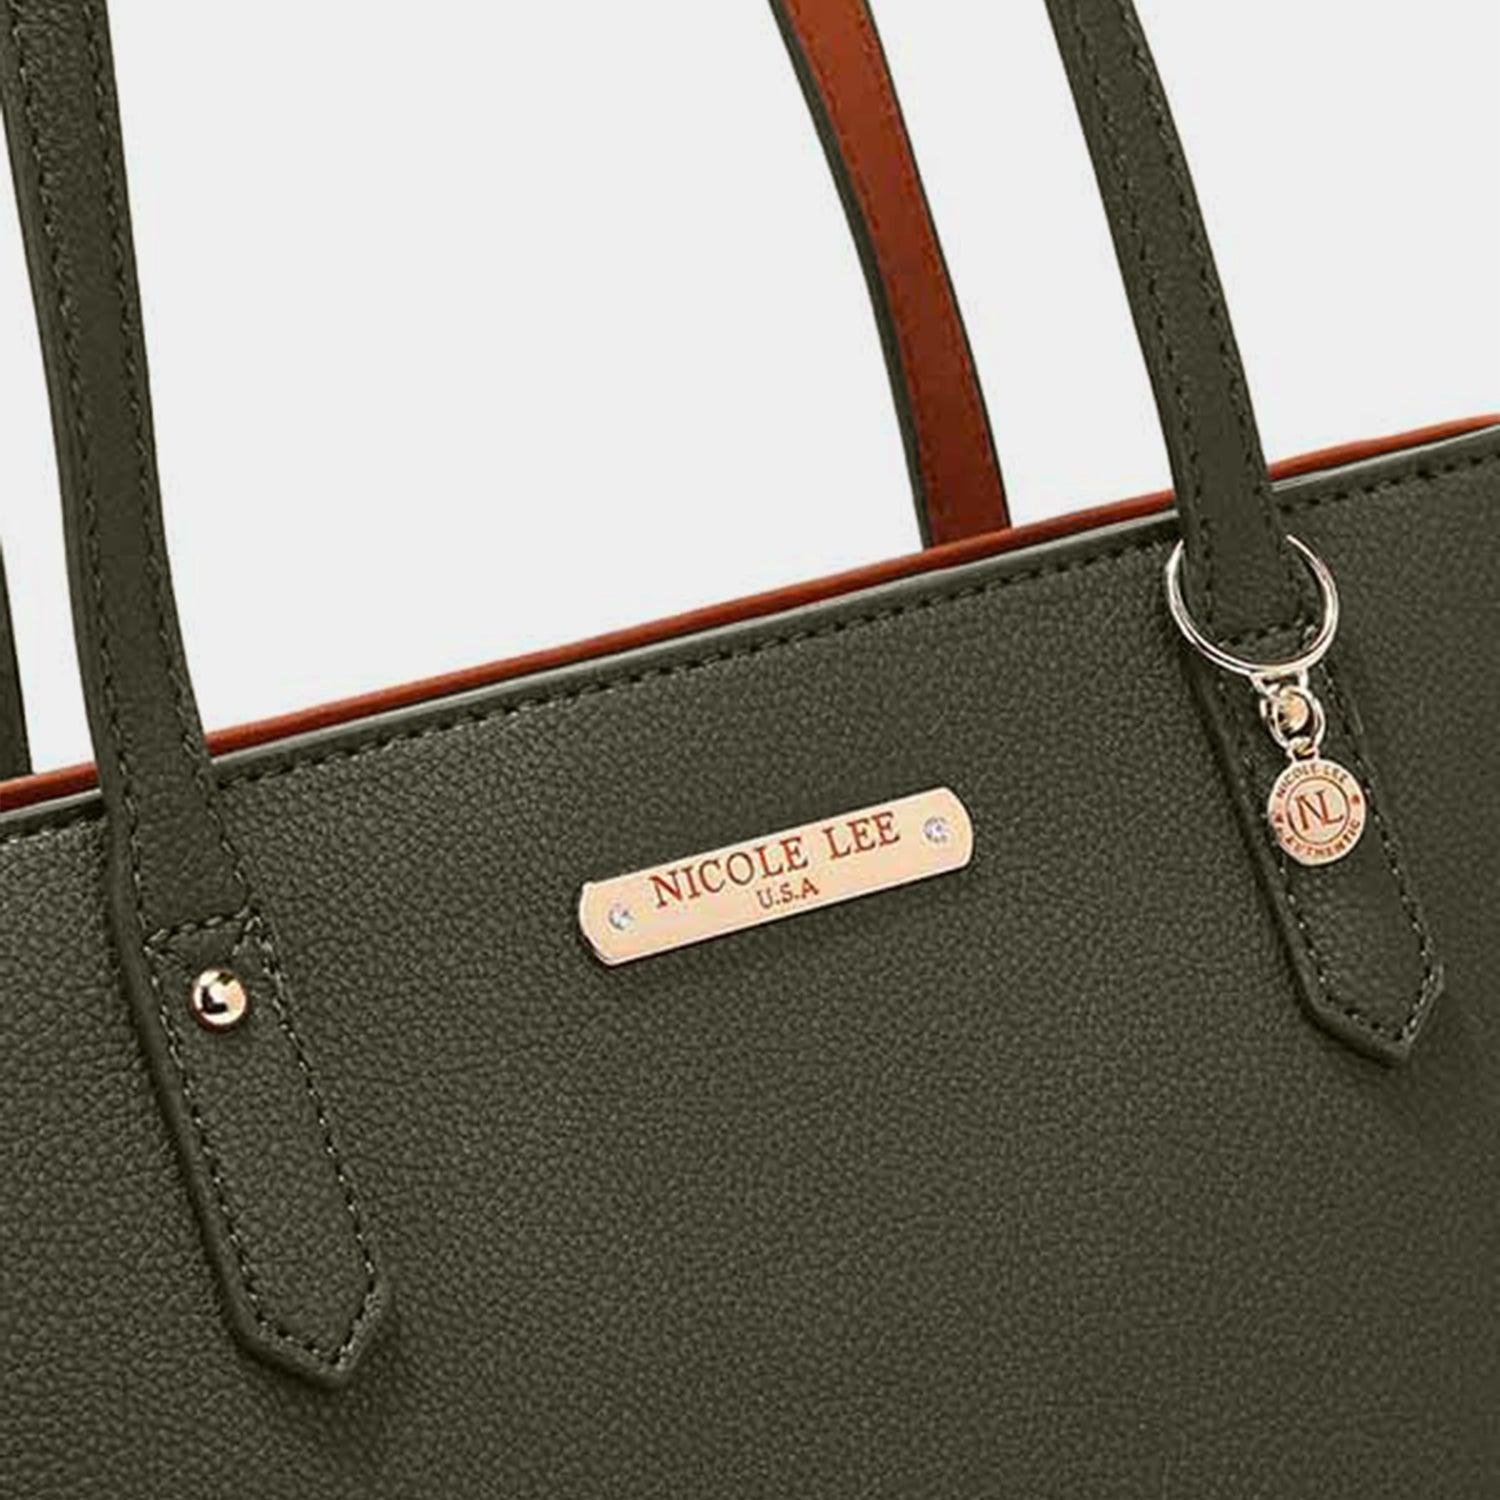 a close up of a purse with a name tag